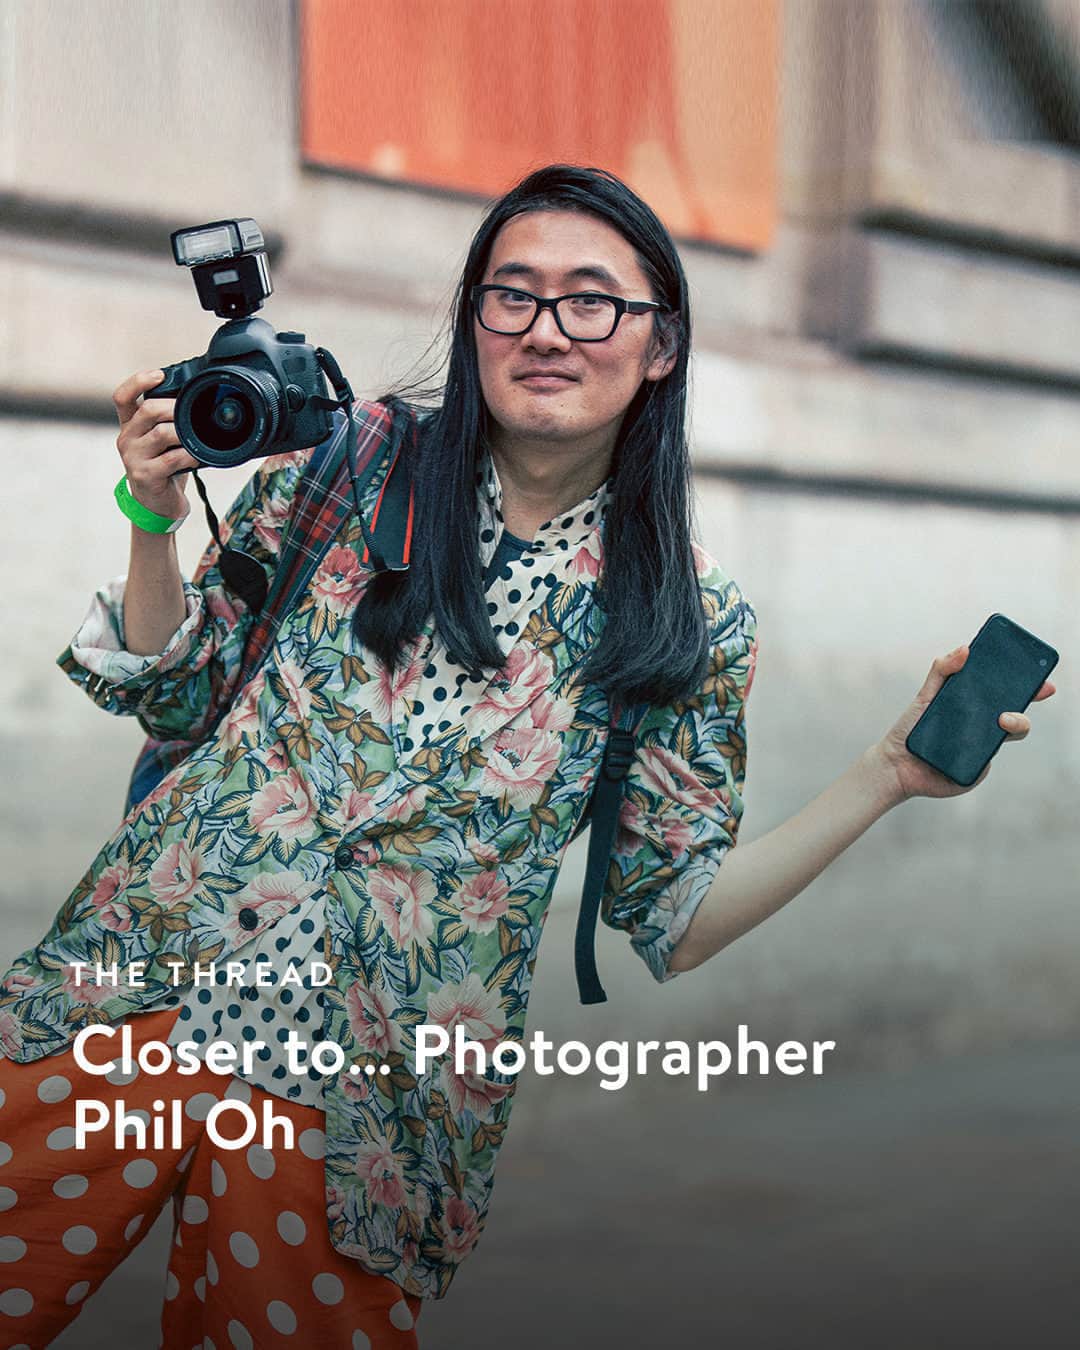 Nordstromのインスタグラム：「Get to know globe-trotting creative and prolific photographer Phil Oh, AKA @mrstreetpeeper. An innate sense of style, a keen eye for energy shared between people, and a buoyant whimsy make Phil's work such a joy. See some of his photography right here on Nordstrom's IG, and head to the link in bio to read our interview with Phil on The Thread.」